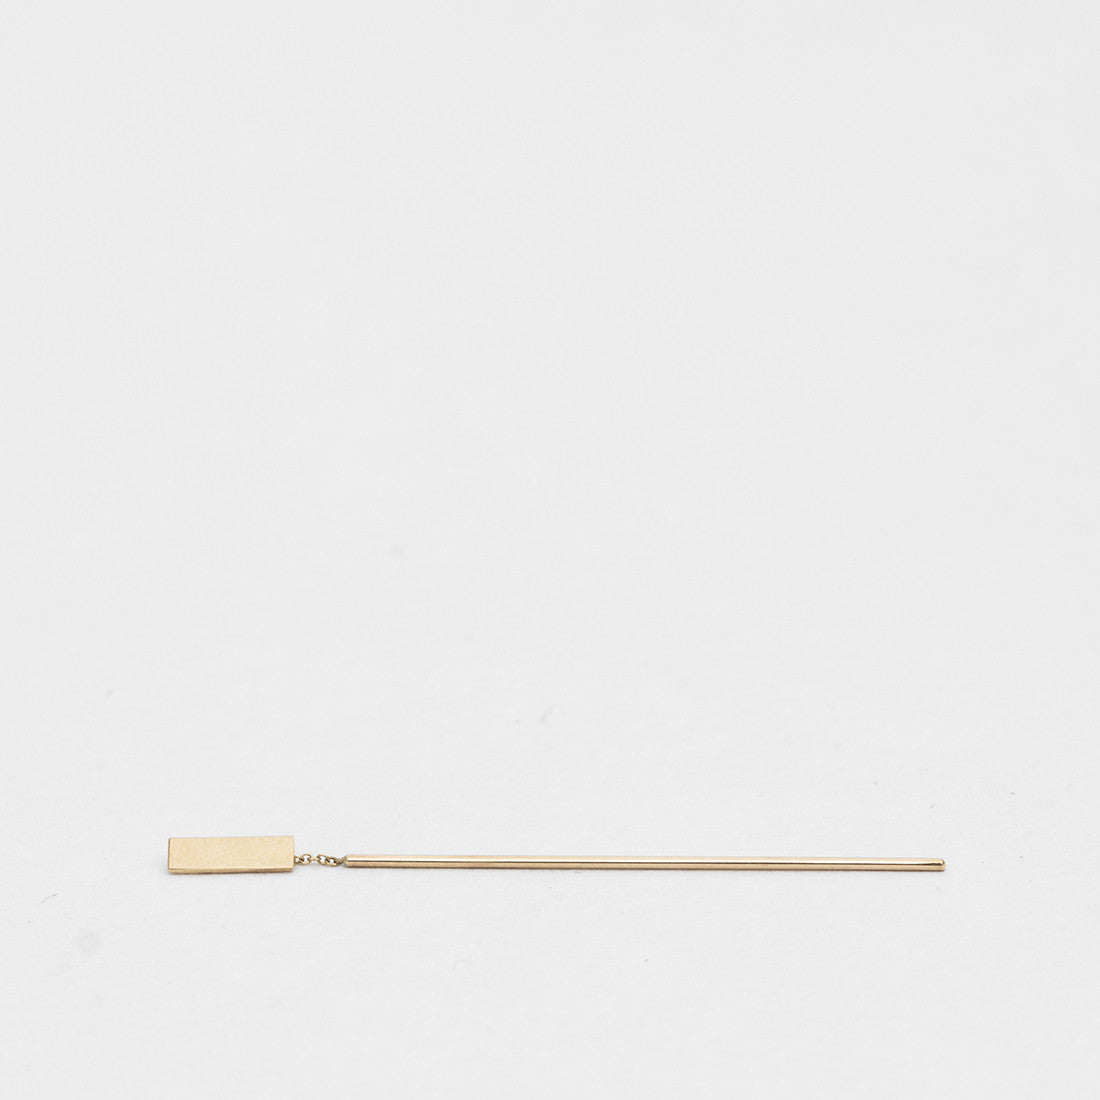 Tili Long Non-Traditional Pull Through Earring in 14k Gold By SHW Fine Jewelry New York City